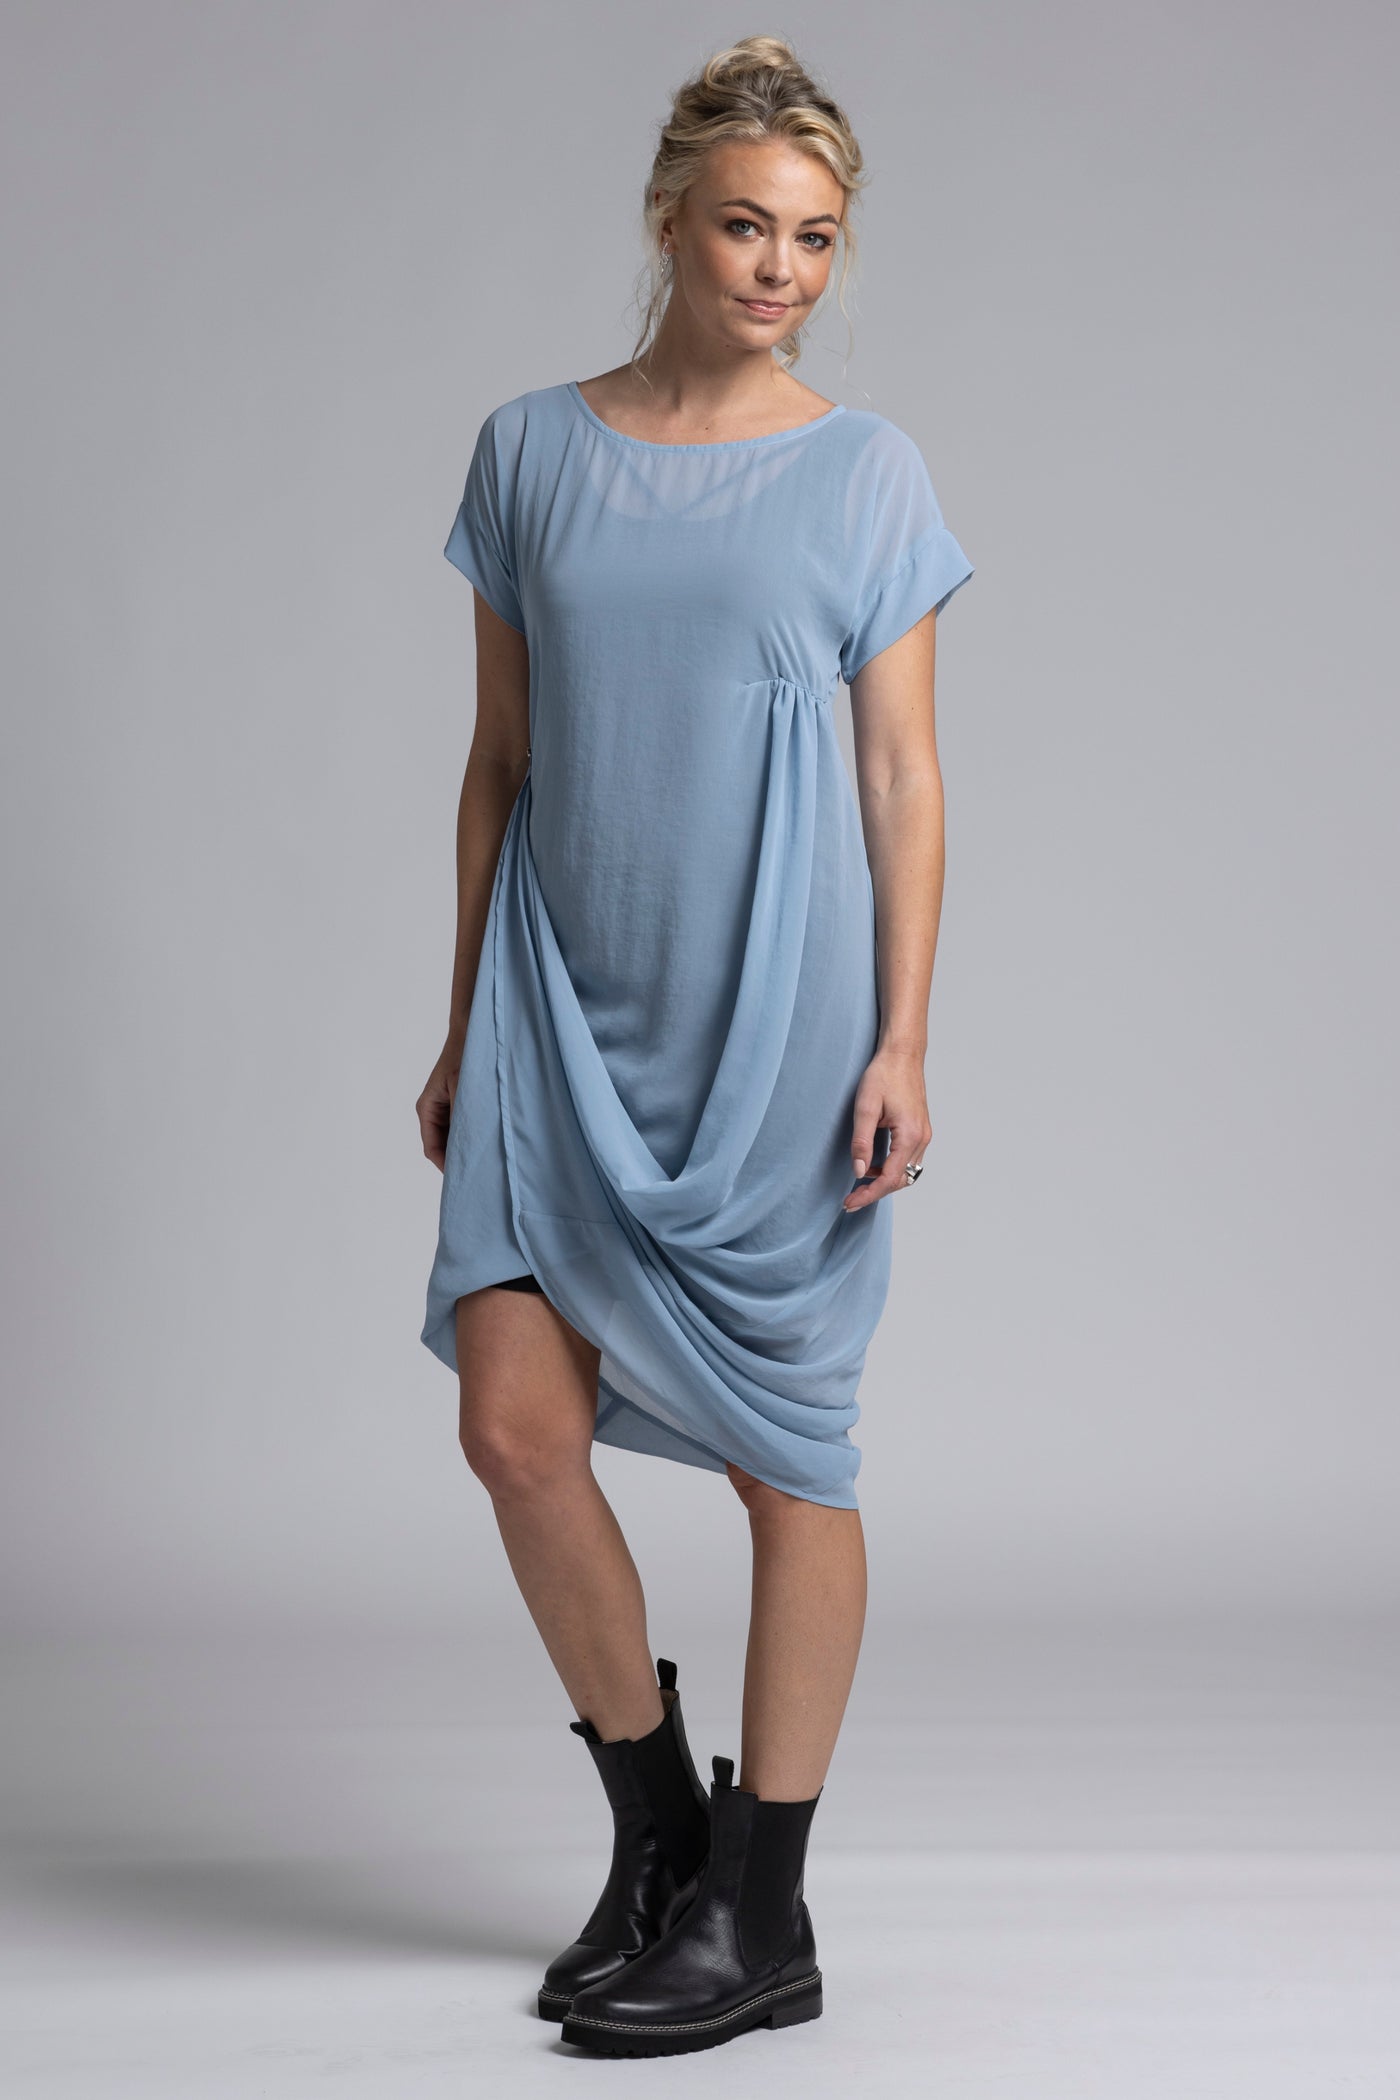 A multi-seasonal, versatile style perfect for casual or formal occasions  Wear it down, draped across the front, or up at the side  Adjusts with side button & hem loopers  Style with our Mid Lattice slip, sneakers or a simple heel for a dressy look  Composition: 100 % poly chiffon